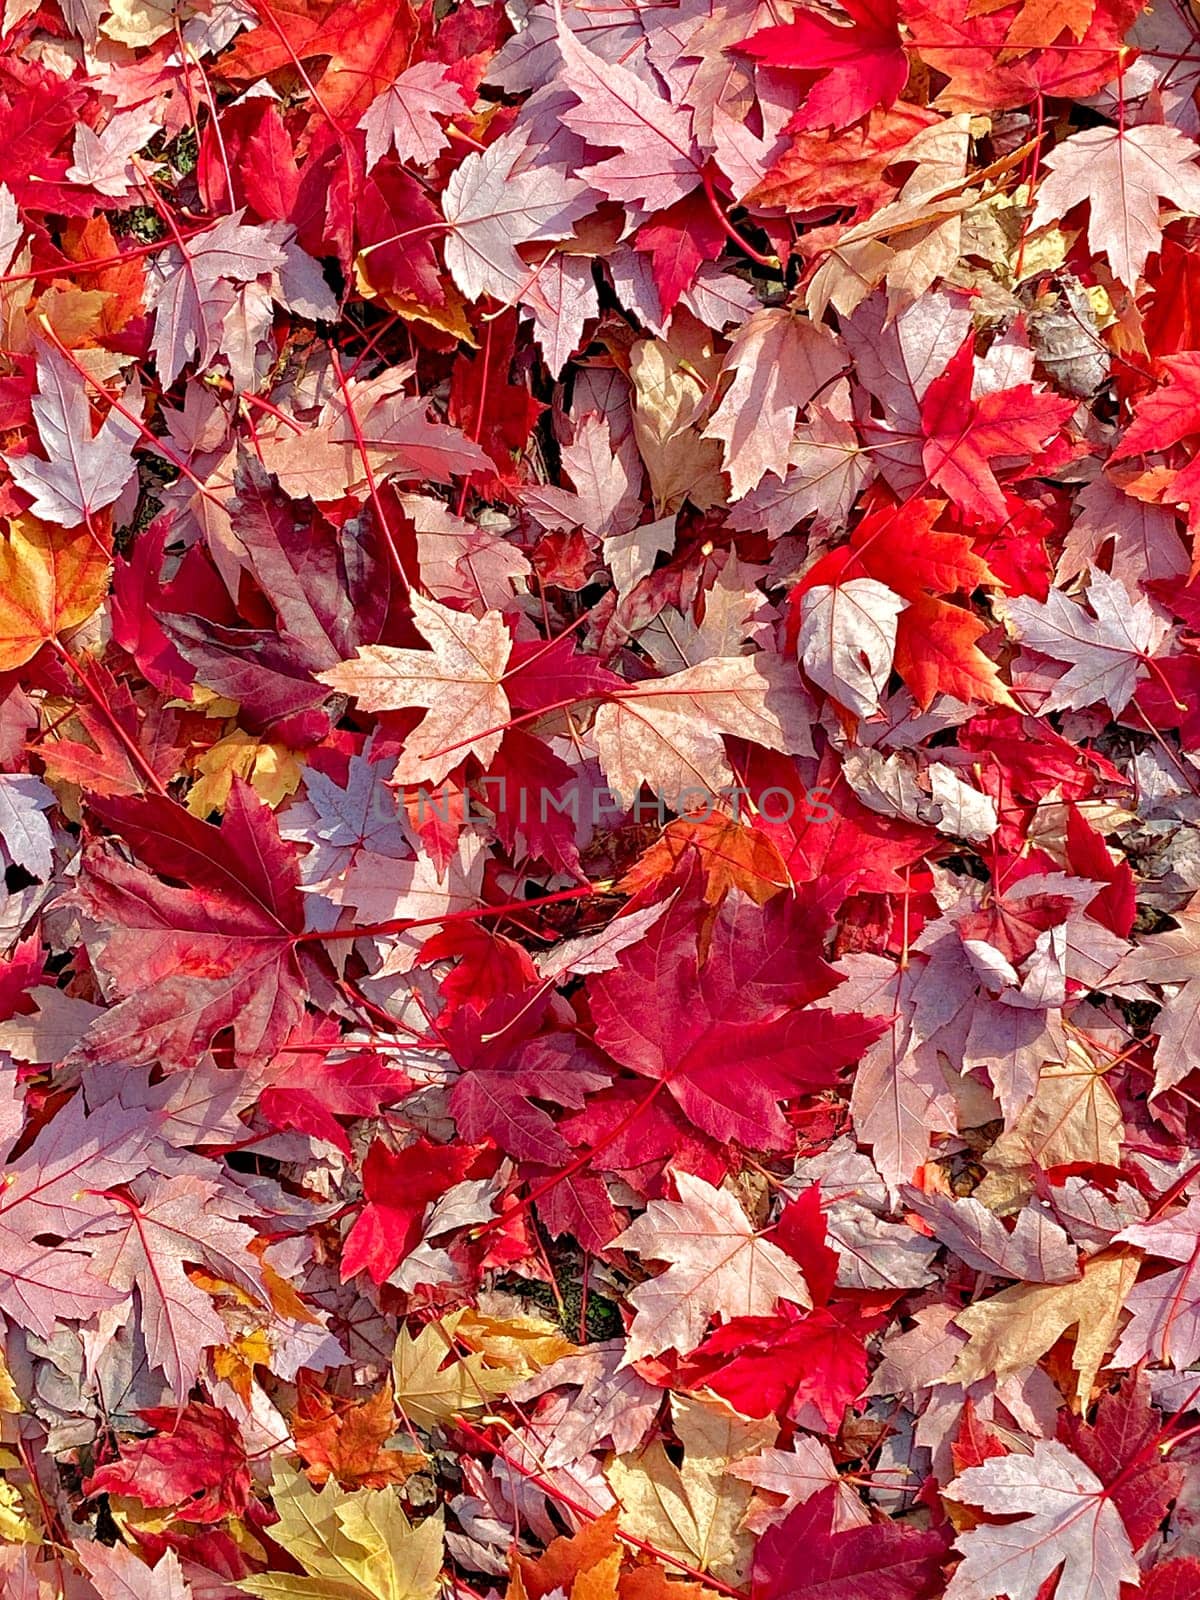 Bright red maple leaves laying on the ground. Maple leaves on autumn season